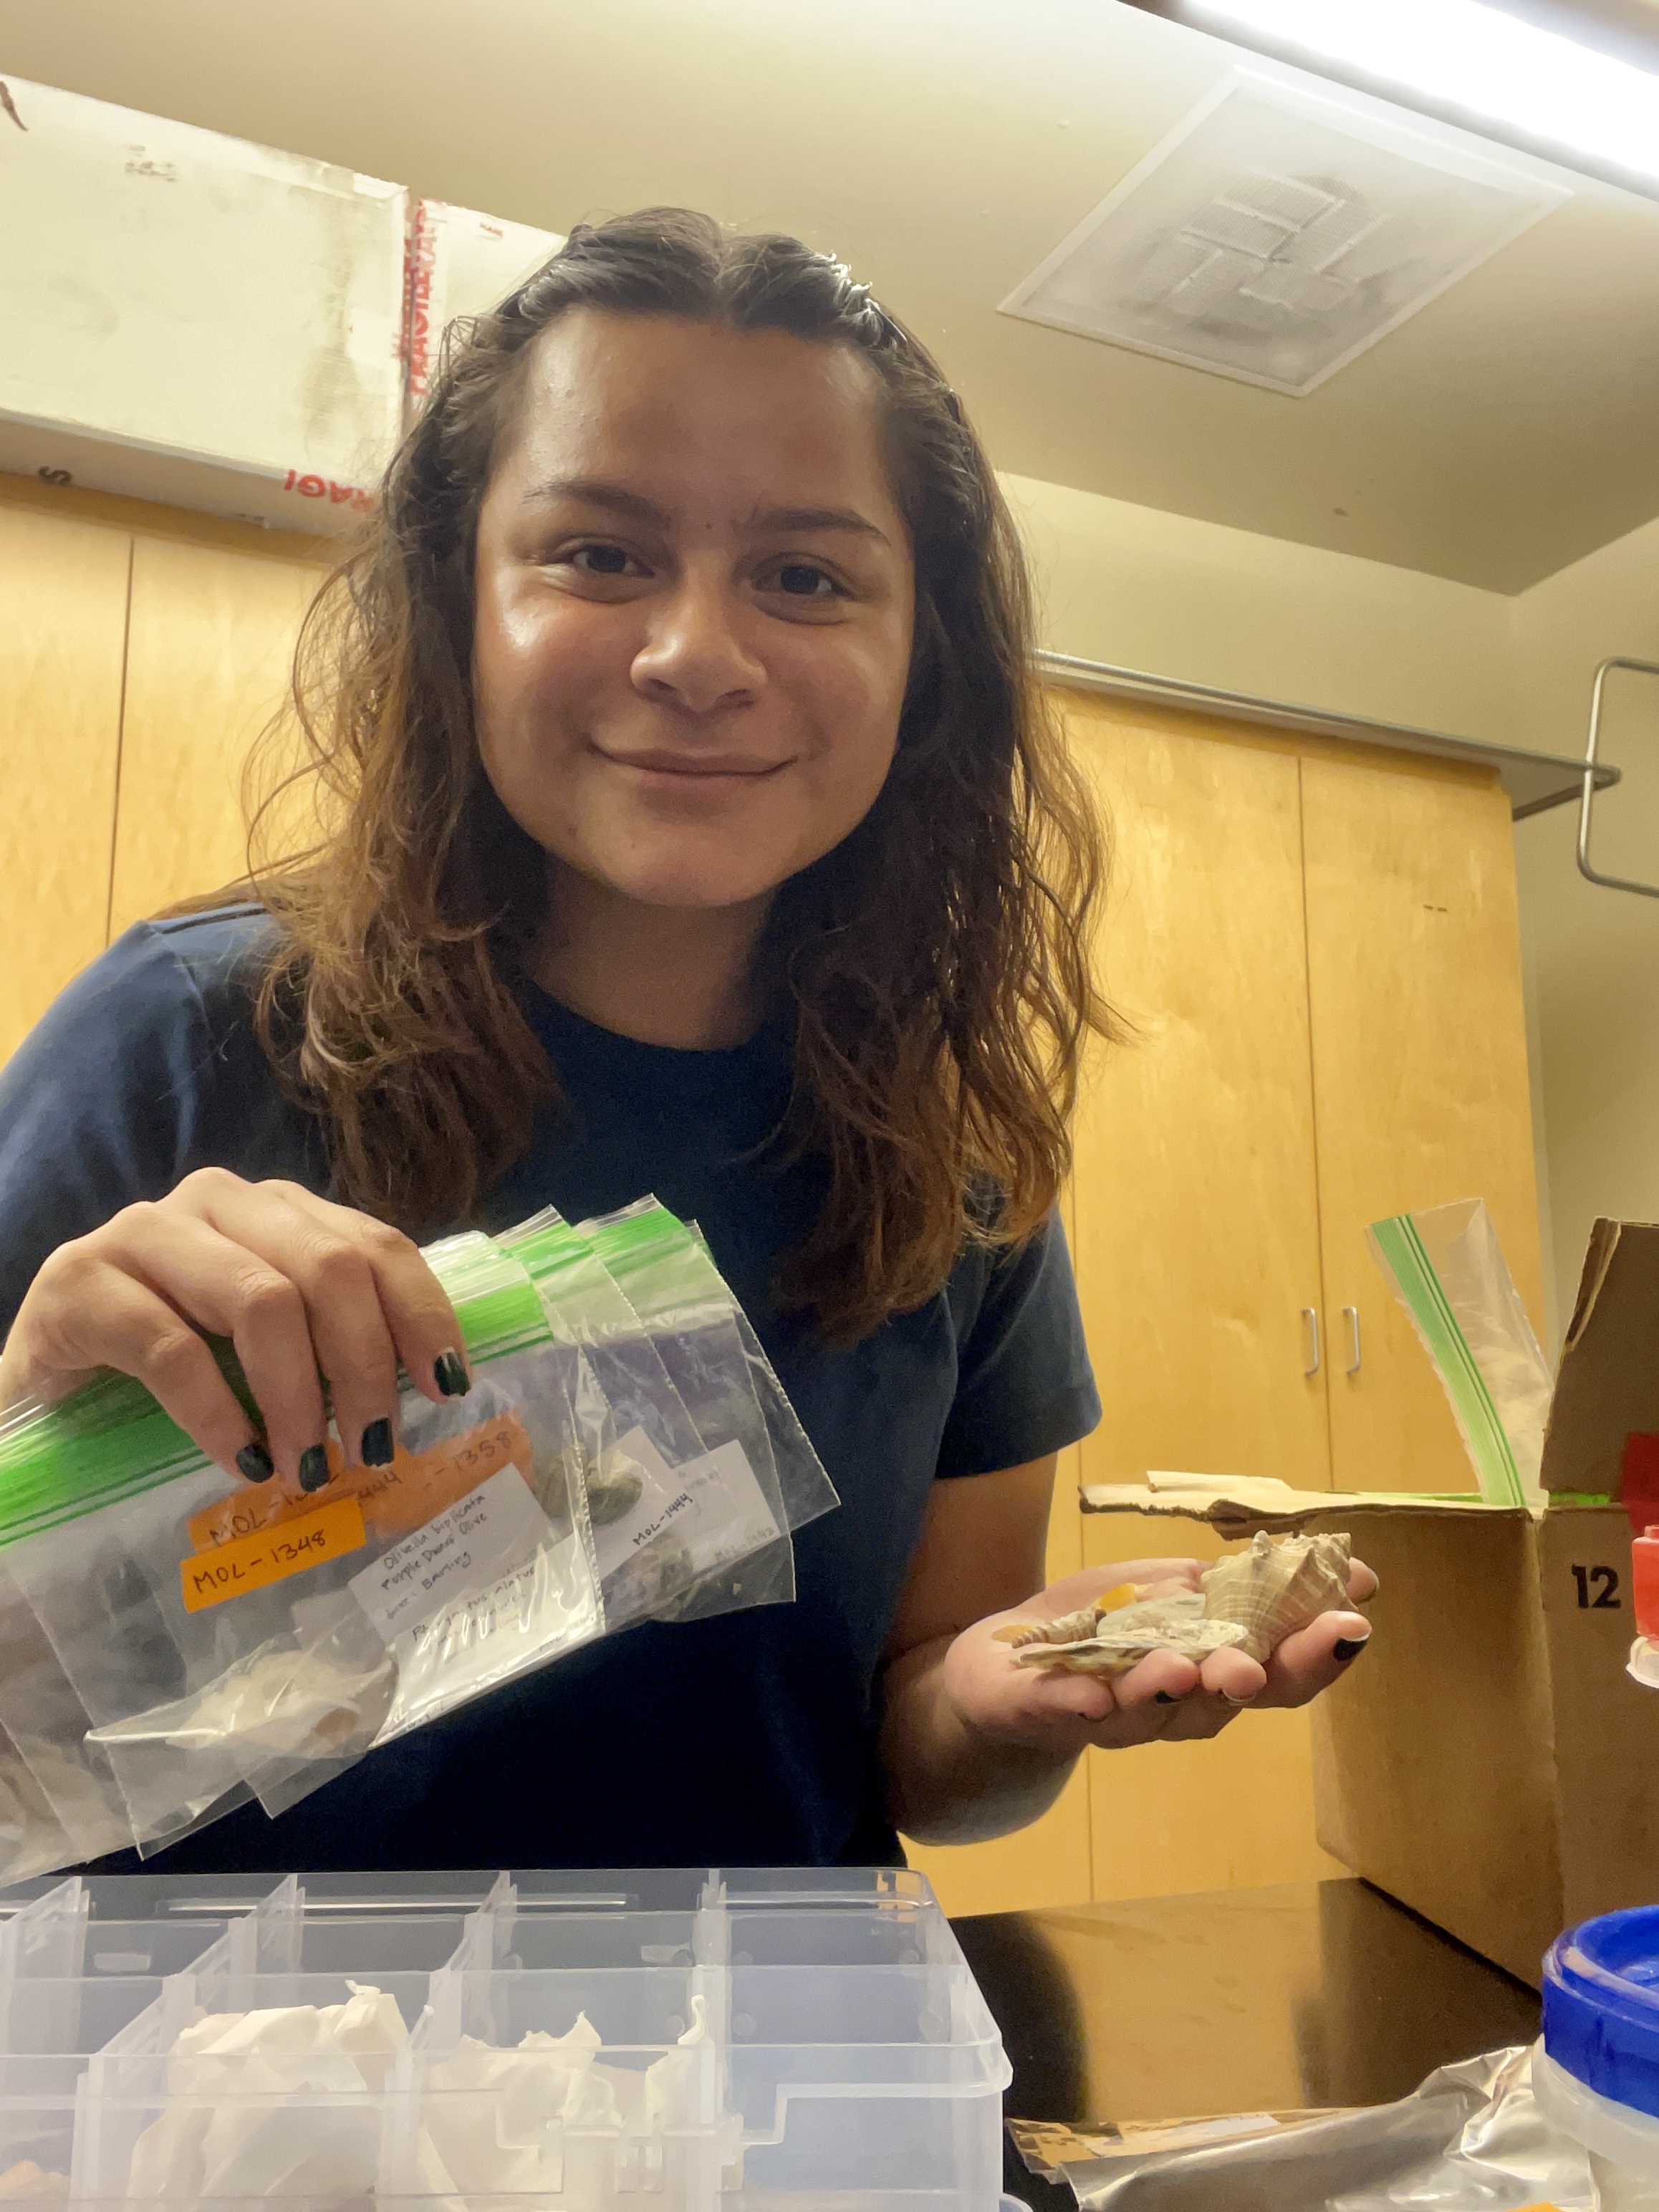 Emily is smiling for the picture while holding multiple sandwich bags filled with various shell specimens in one hand. The other hand is holding multiple shells